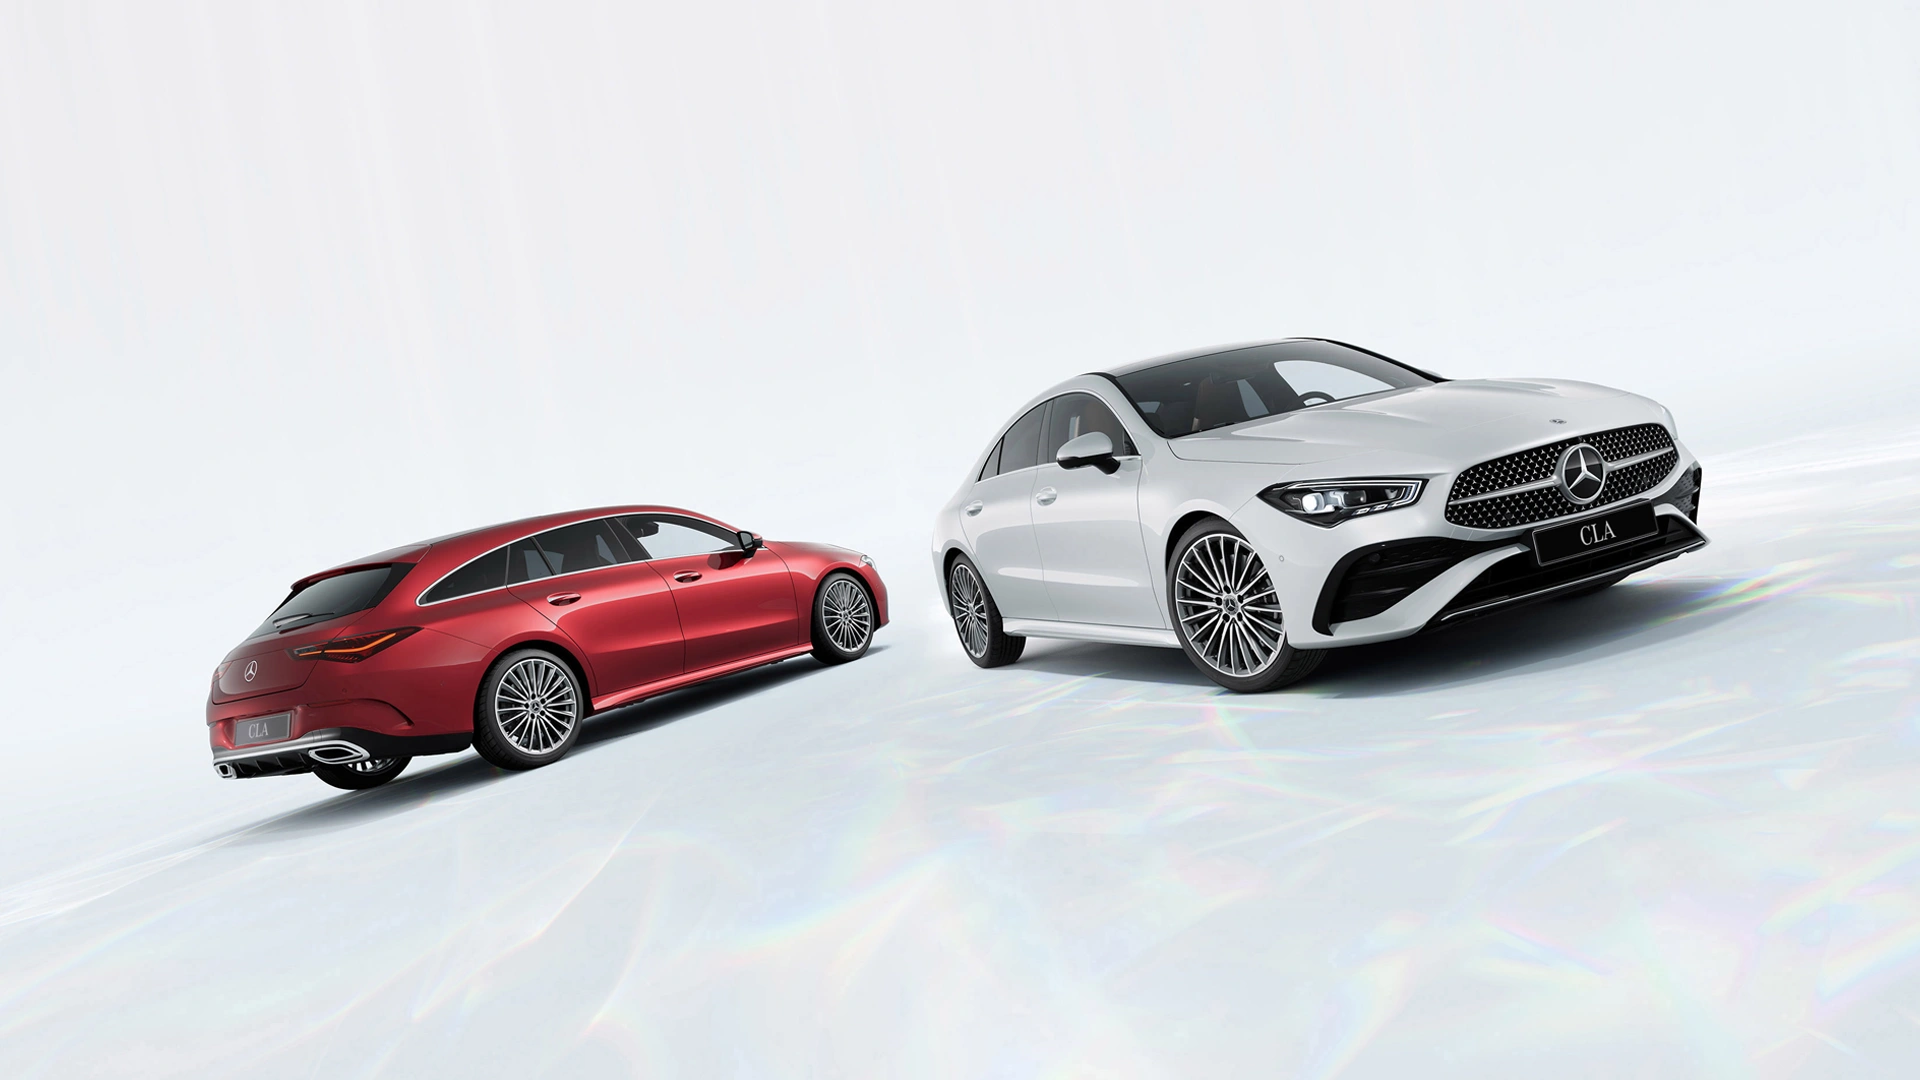 Mercedes-Benz CLA coupe and shooting break on white sleek background.